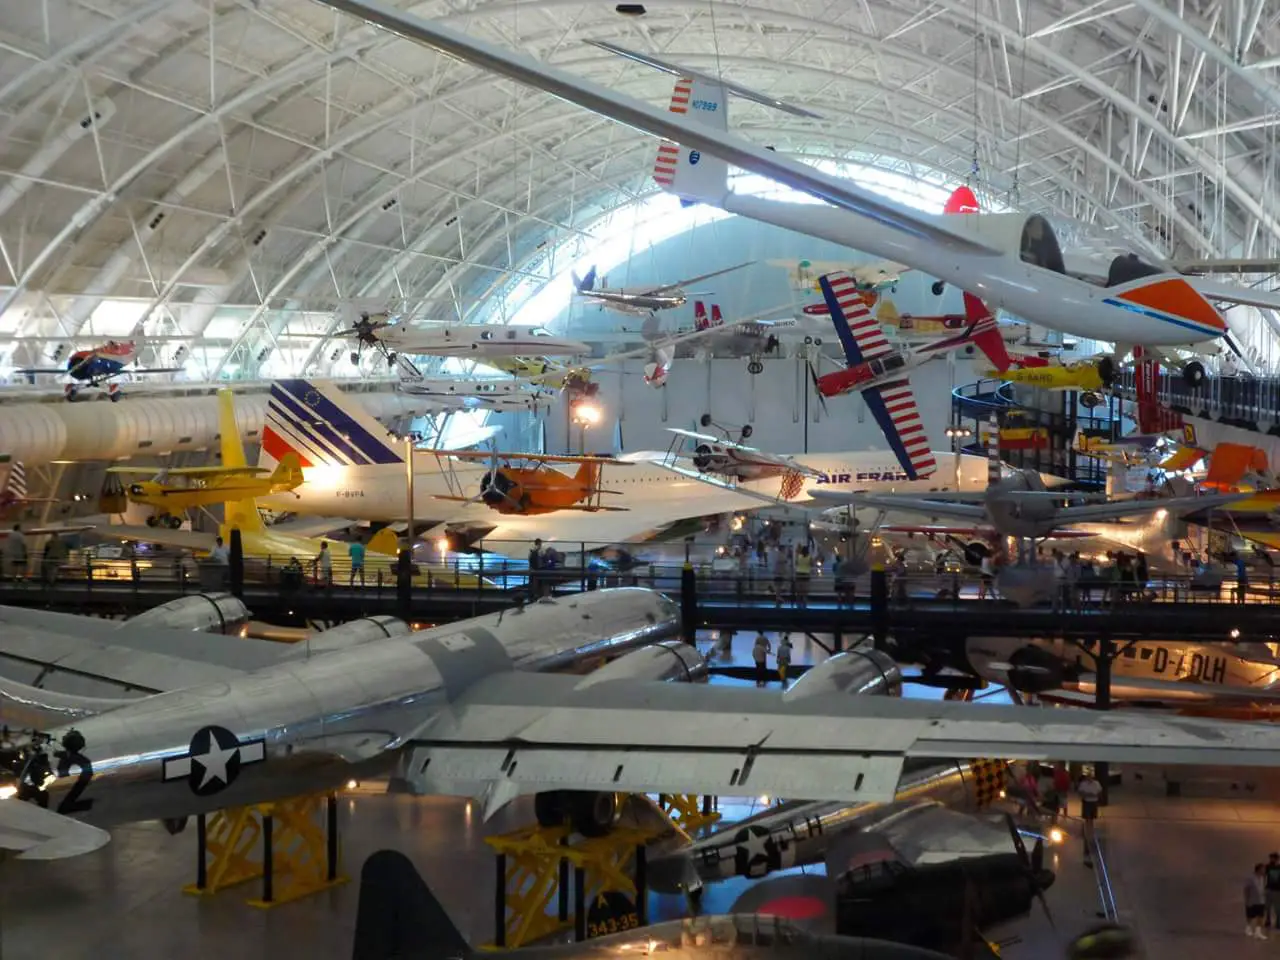 Guide to Smithsonian Air & Space Museum